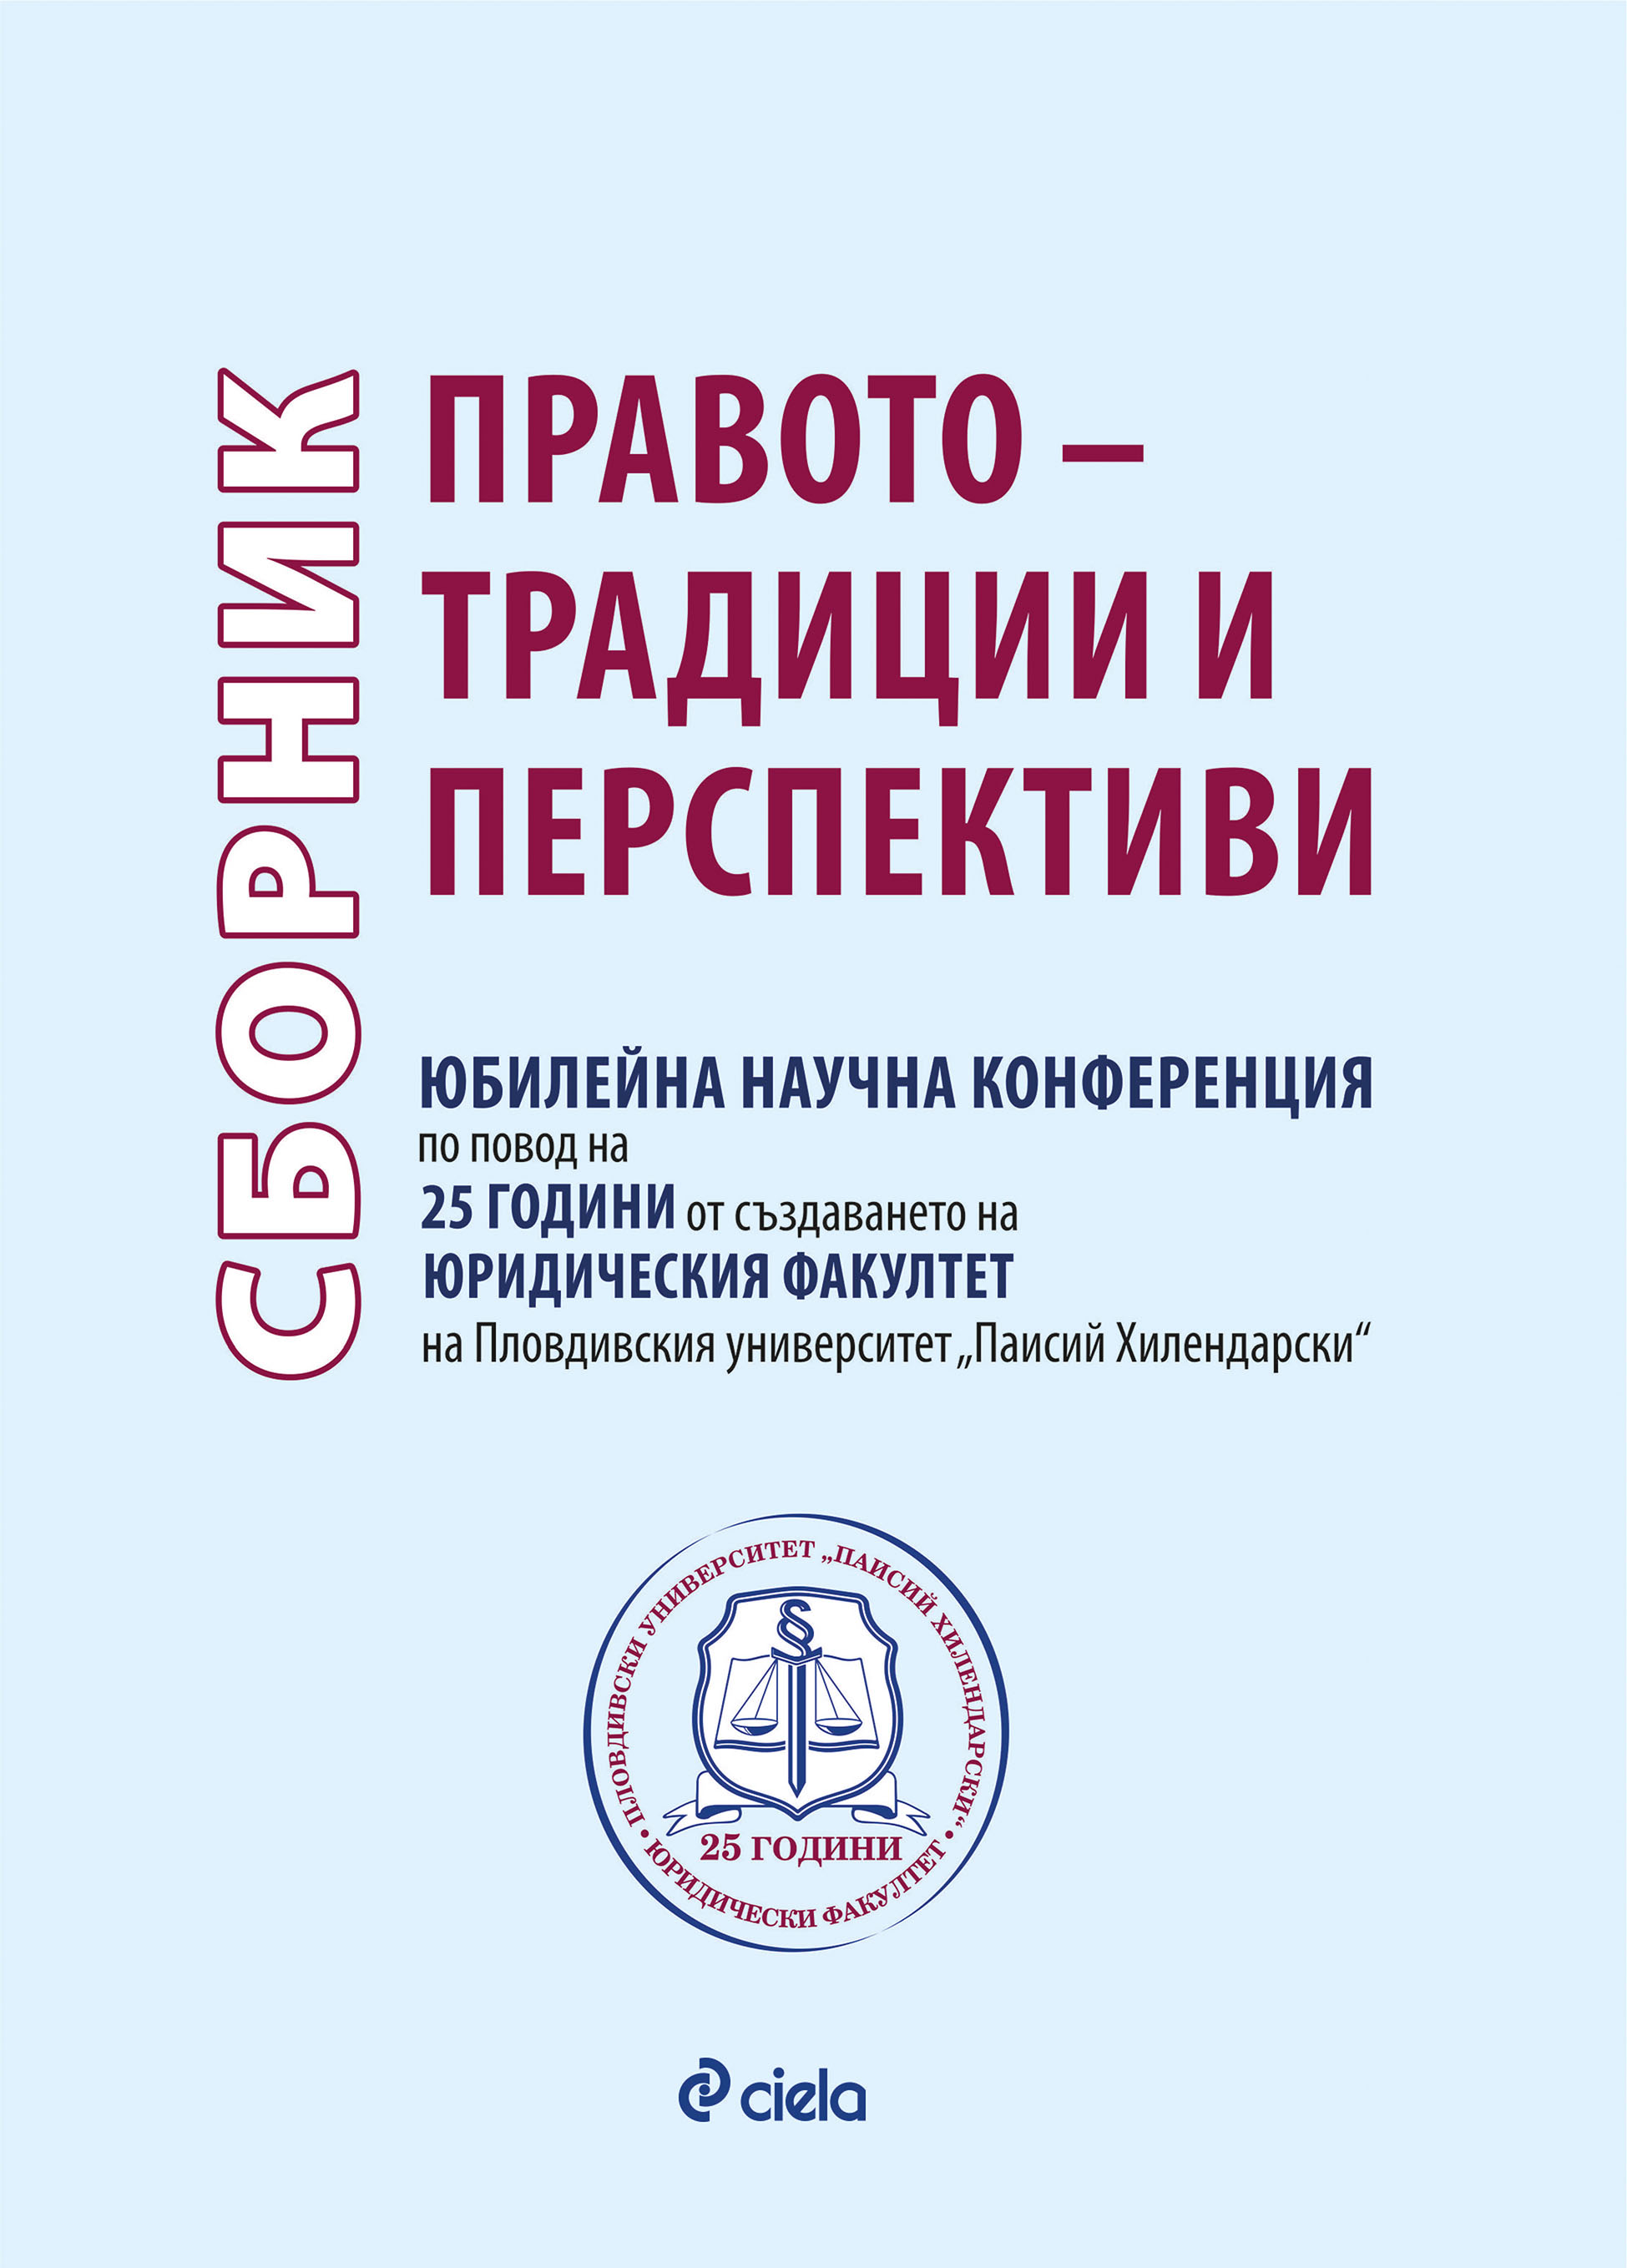 Law - Traditions and Perspectives. Proceedings of the Jubilee Scientific Conference on the Occasion of the 25th Anniversary of the Establishment of the Faculty of Law at the Plovdiv University "Paisii Hilendarski"